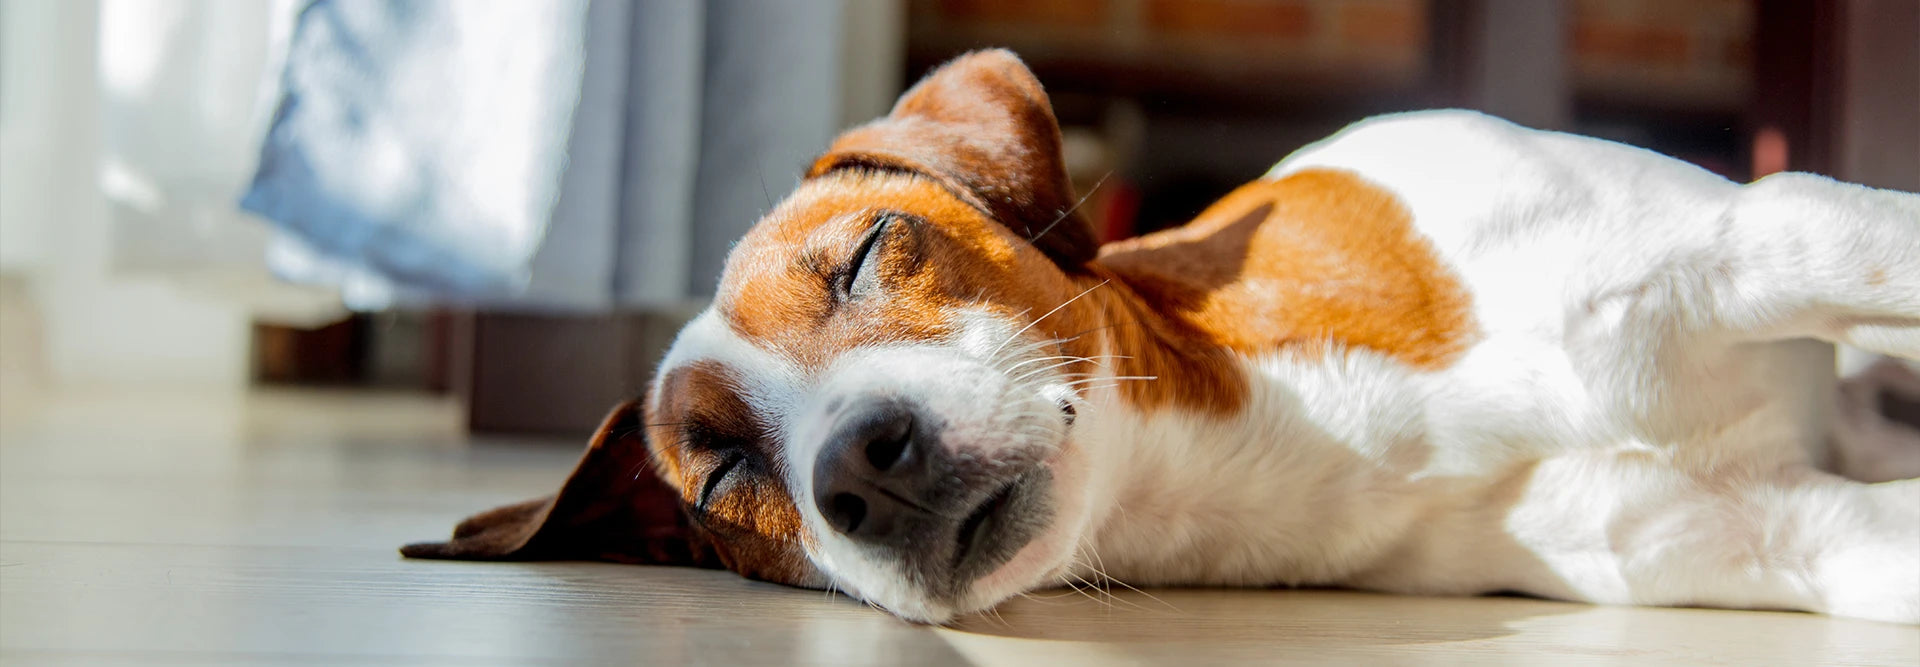 fascinating sleep facts about dogs